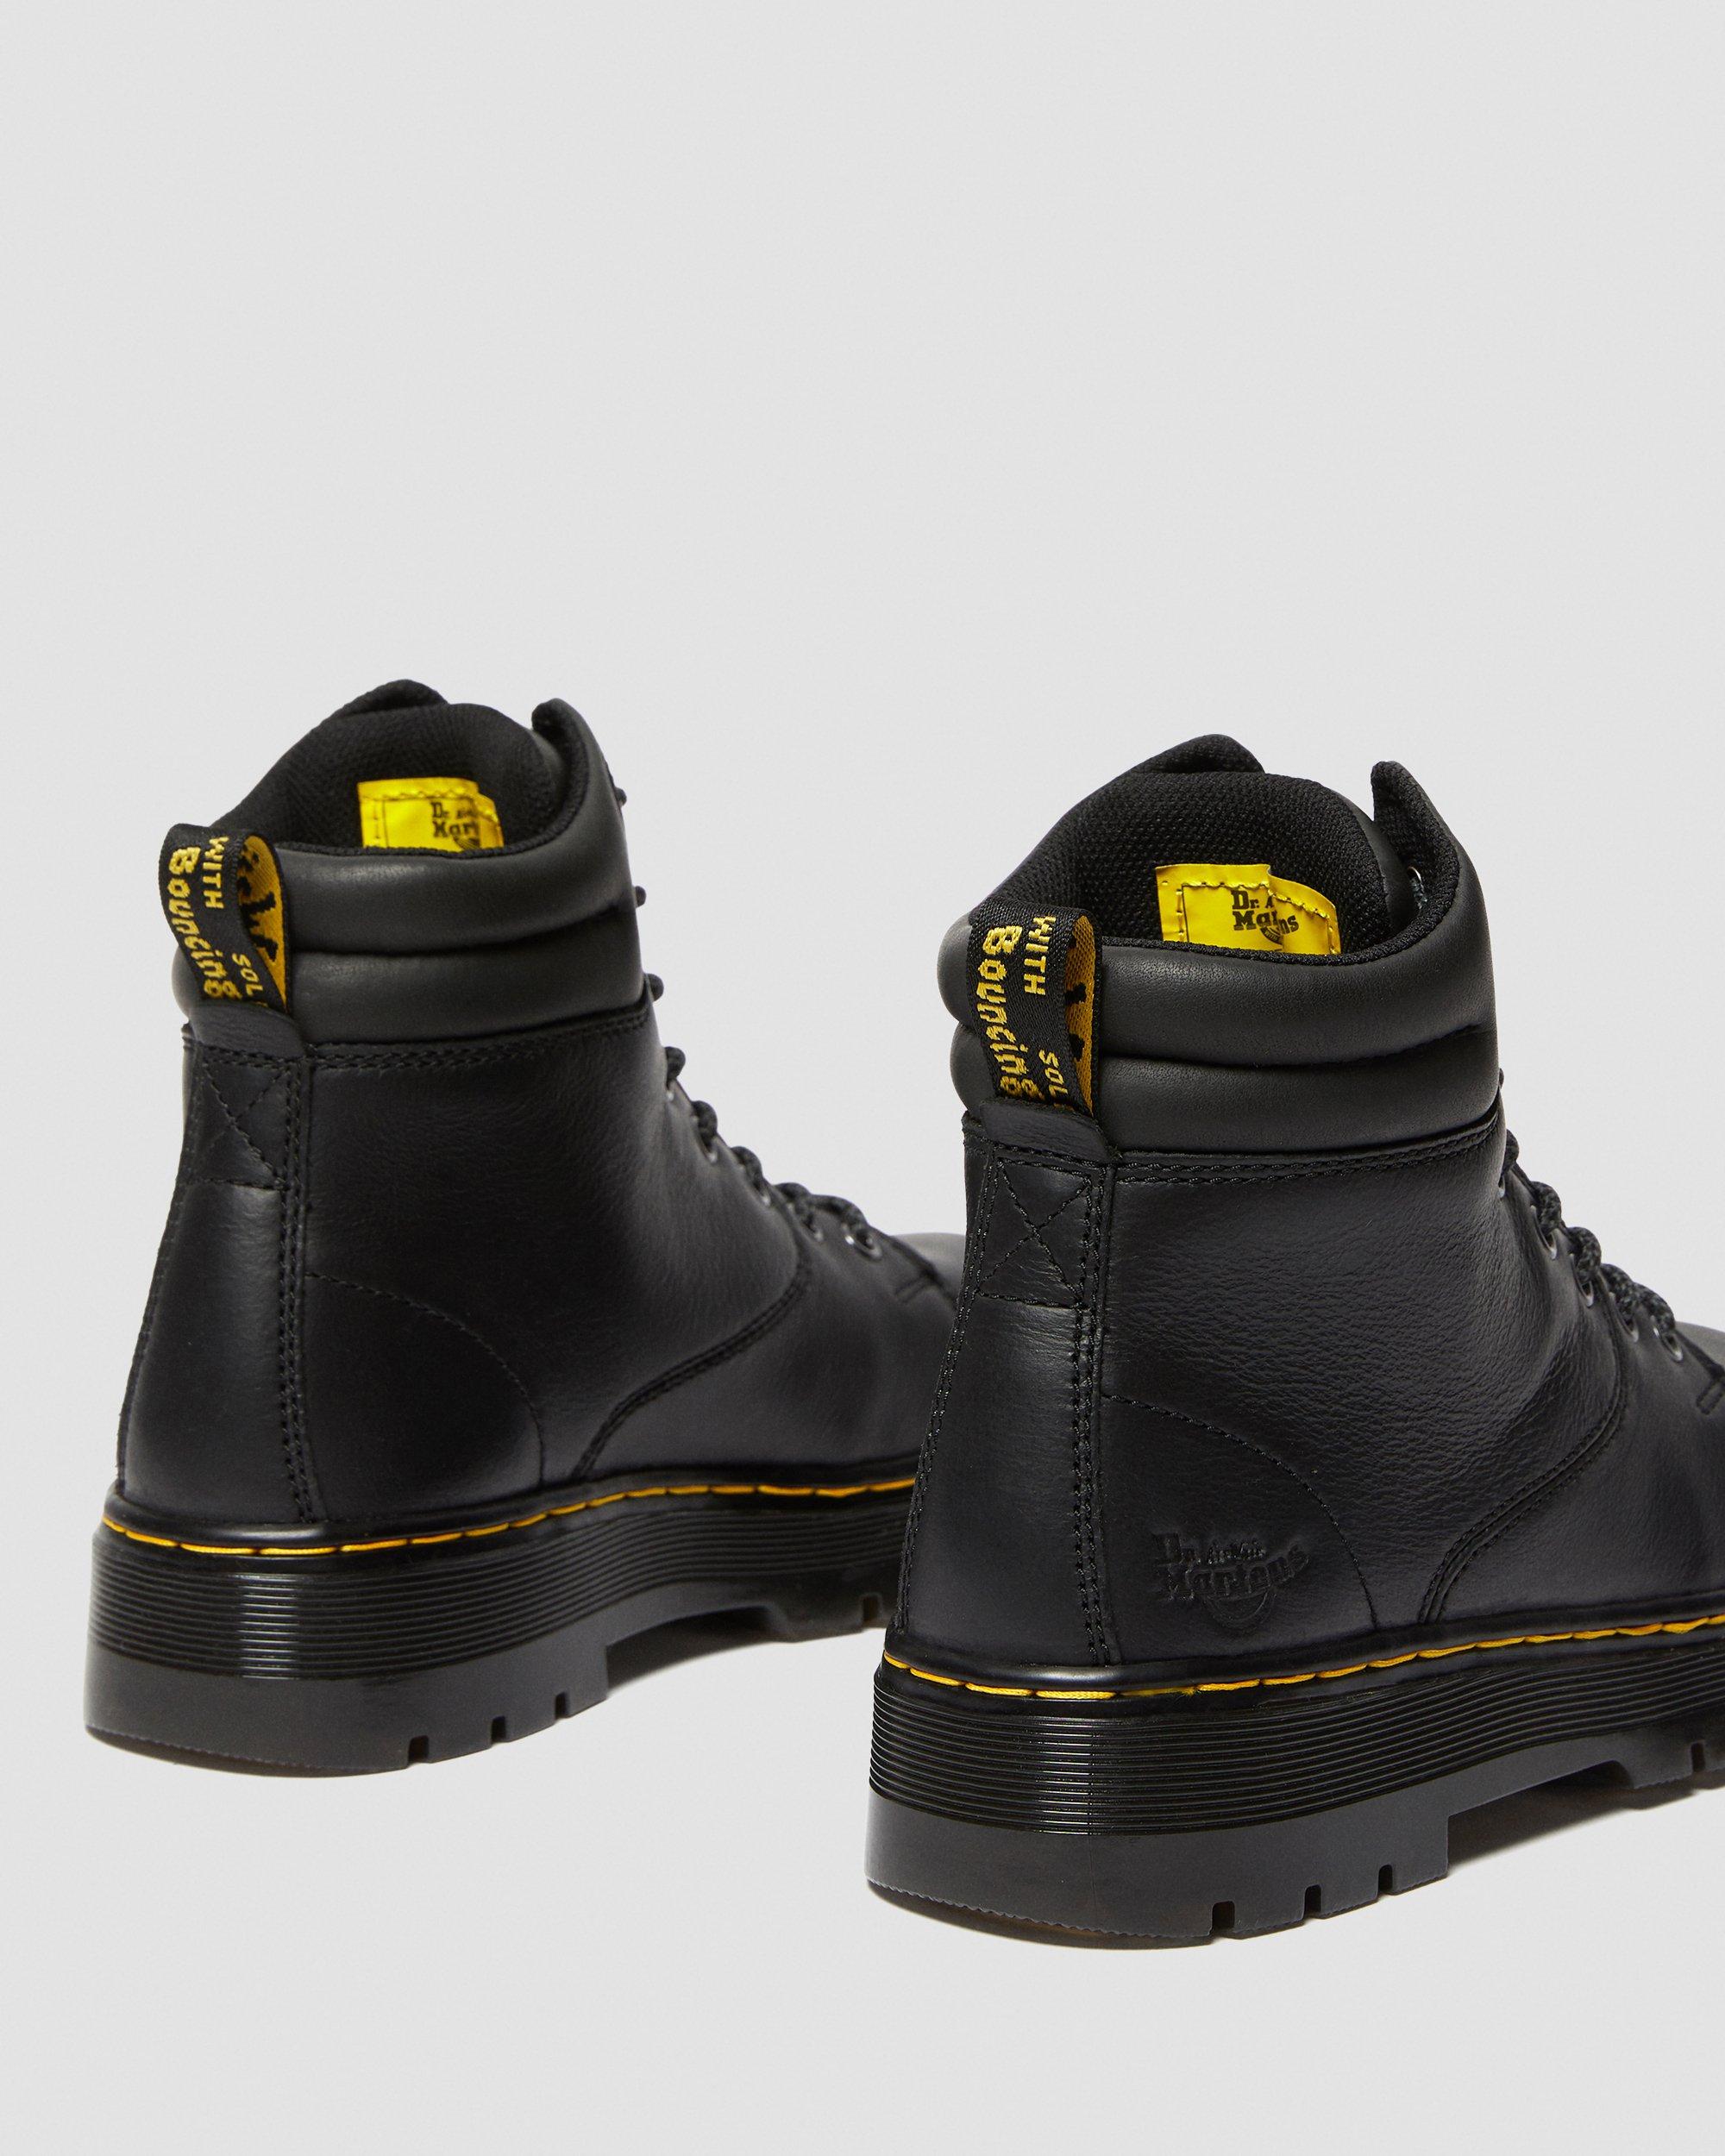 Gilbreth Women's Steel Toe Work Boots | Dr. Martens